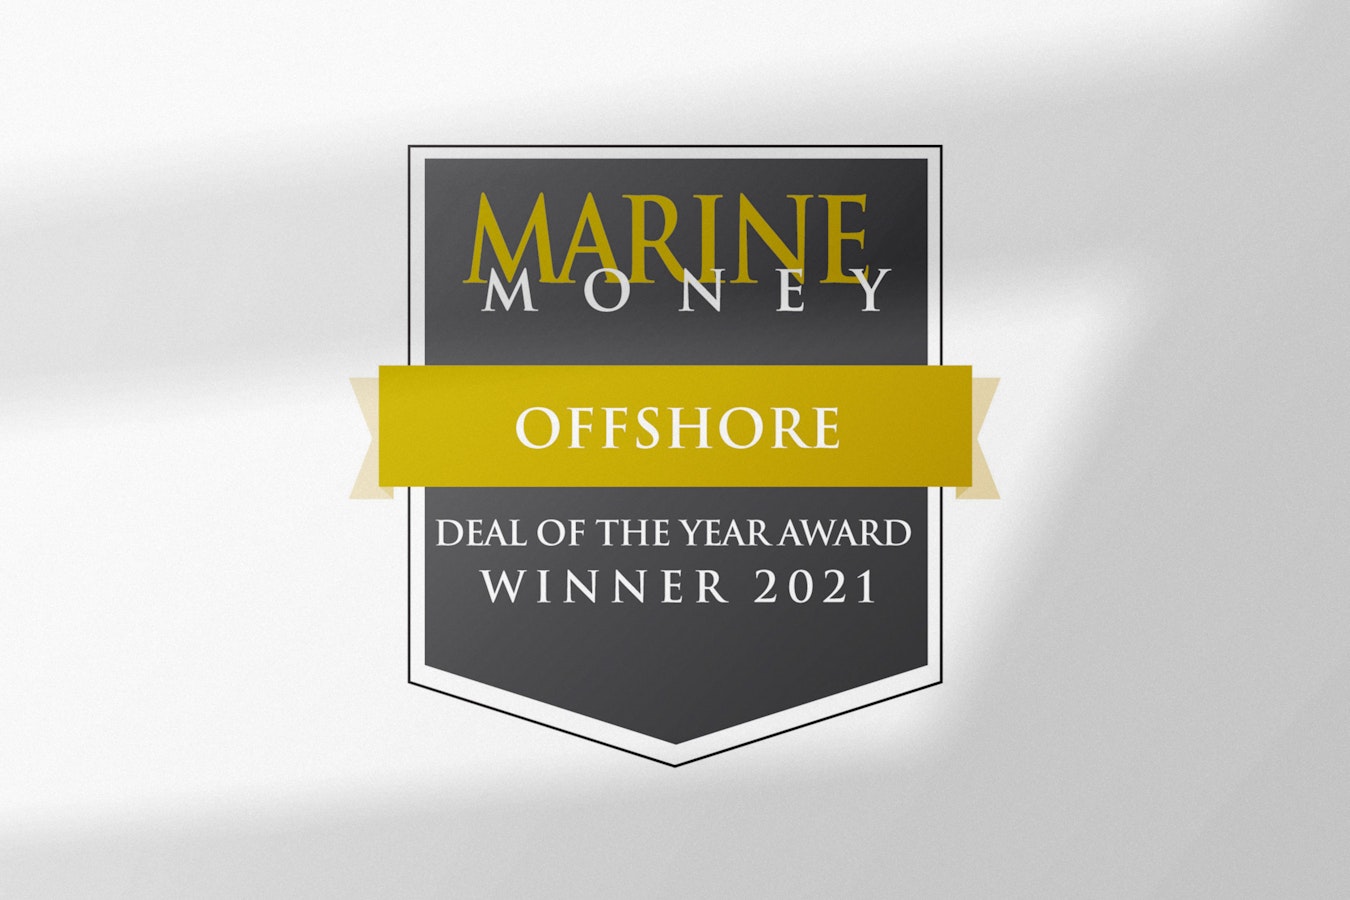 Edda Winds IPO awarded Marine Money’s “2021 Deal of The Year Offshore”